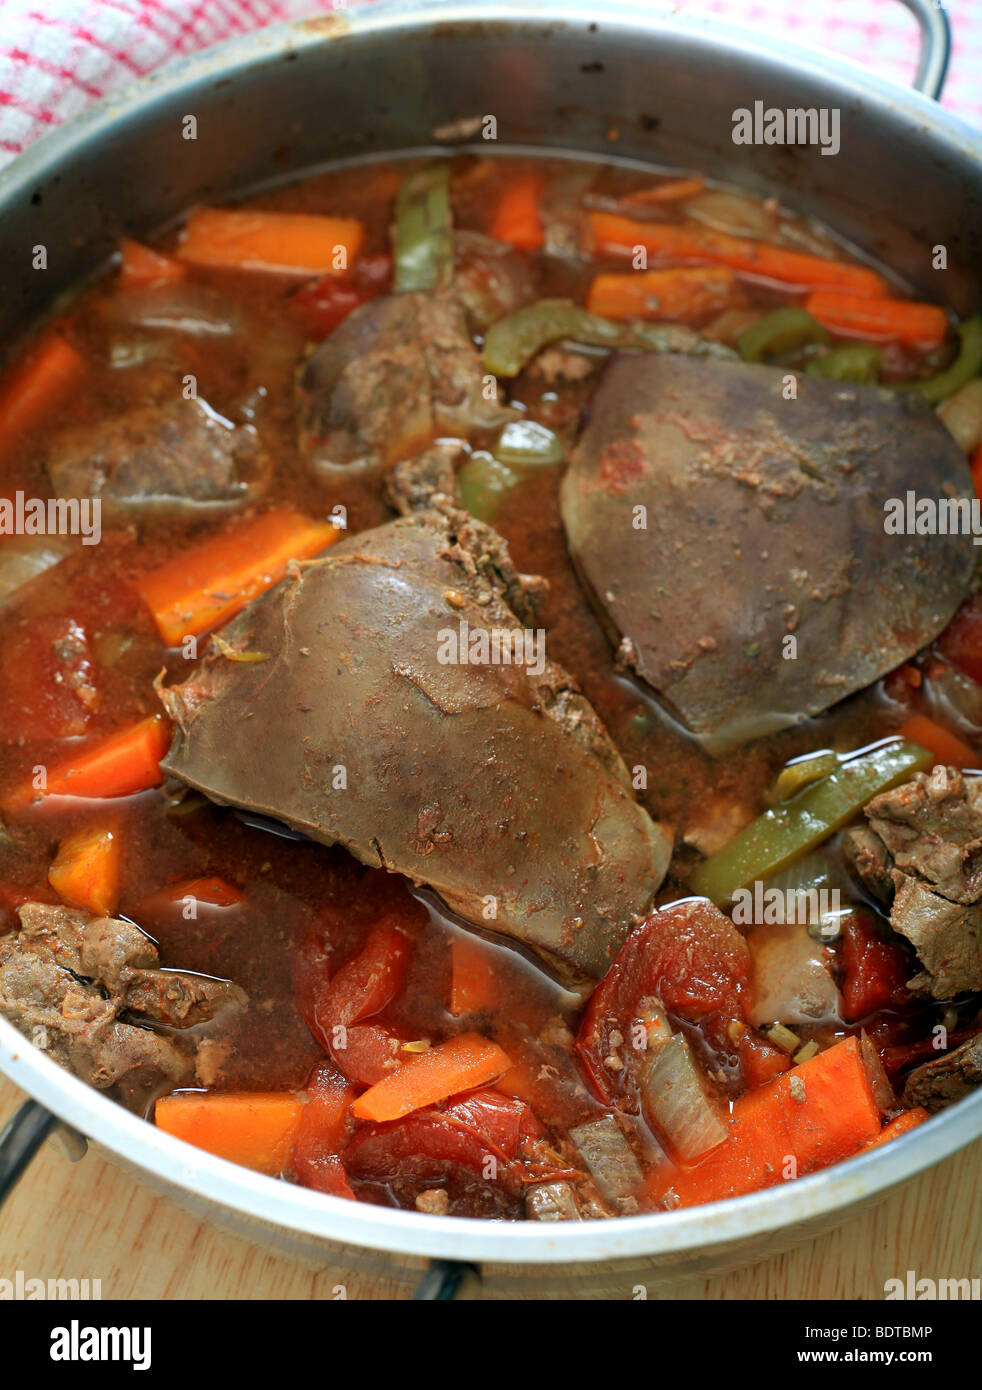 Vertical view of a pot of lamb's liver and vegetable casserole. Stock Photo